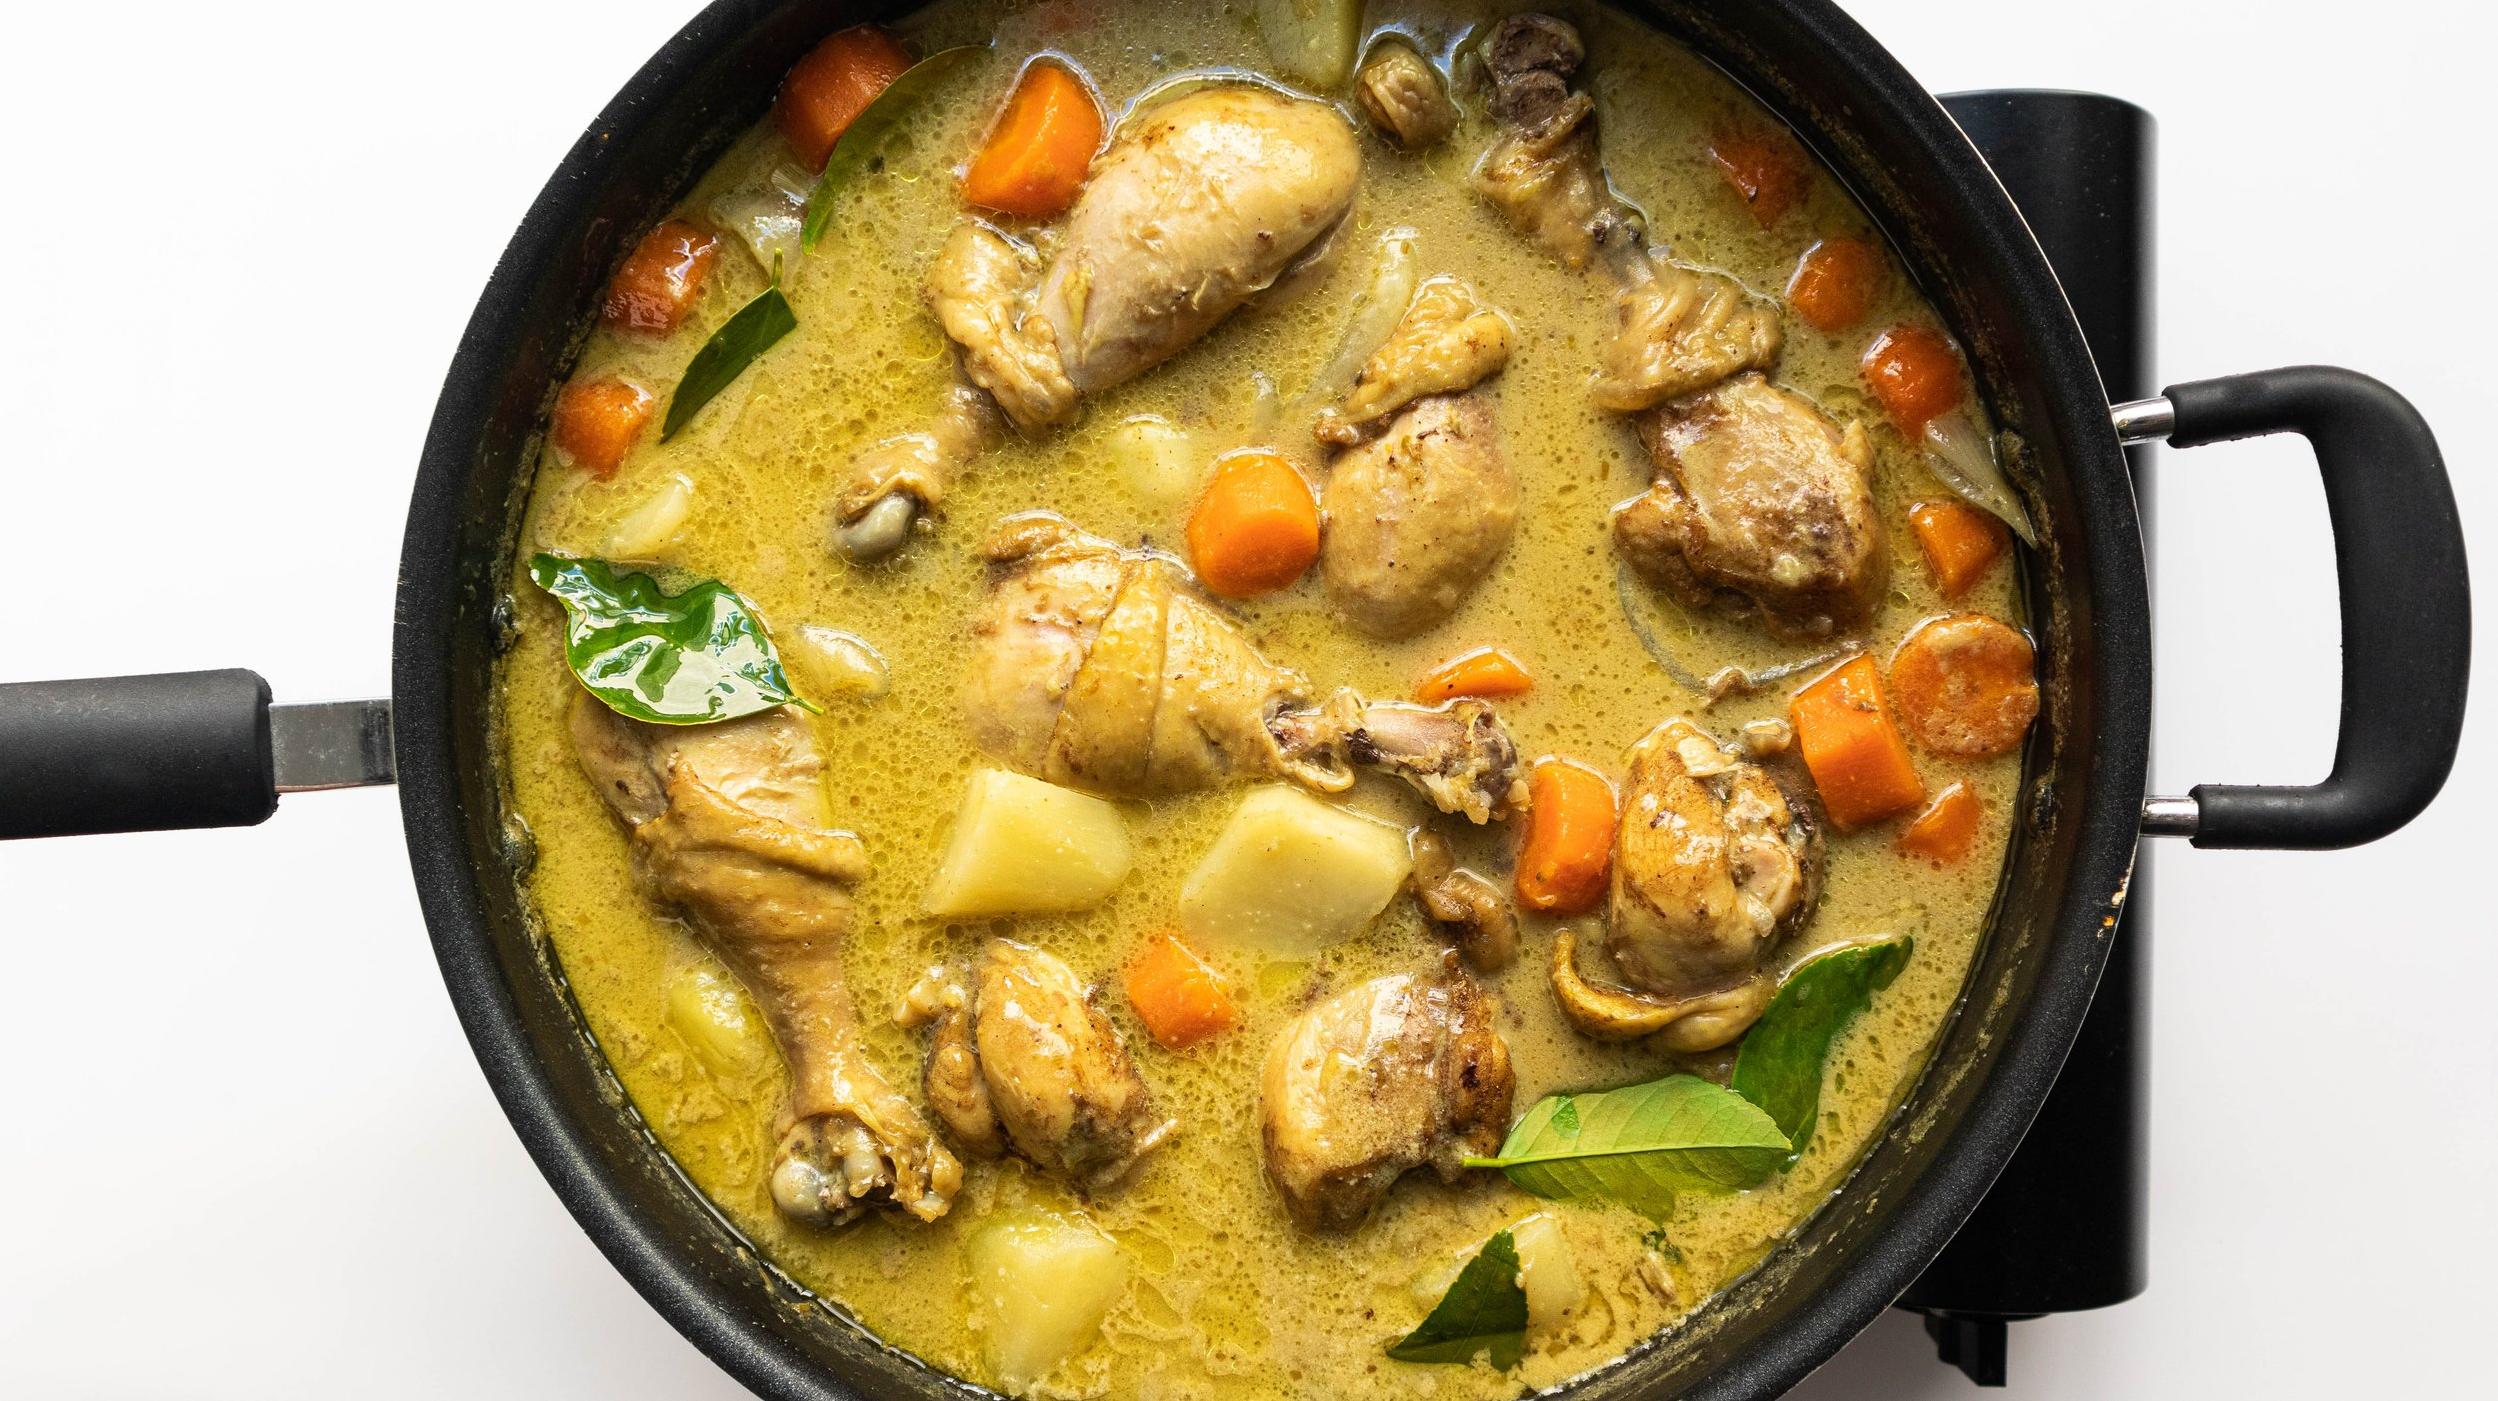  A spoonful of this delicious curry will warm both your soul and belly.